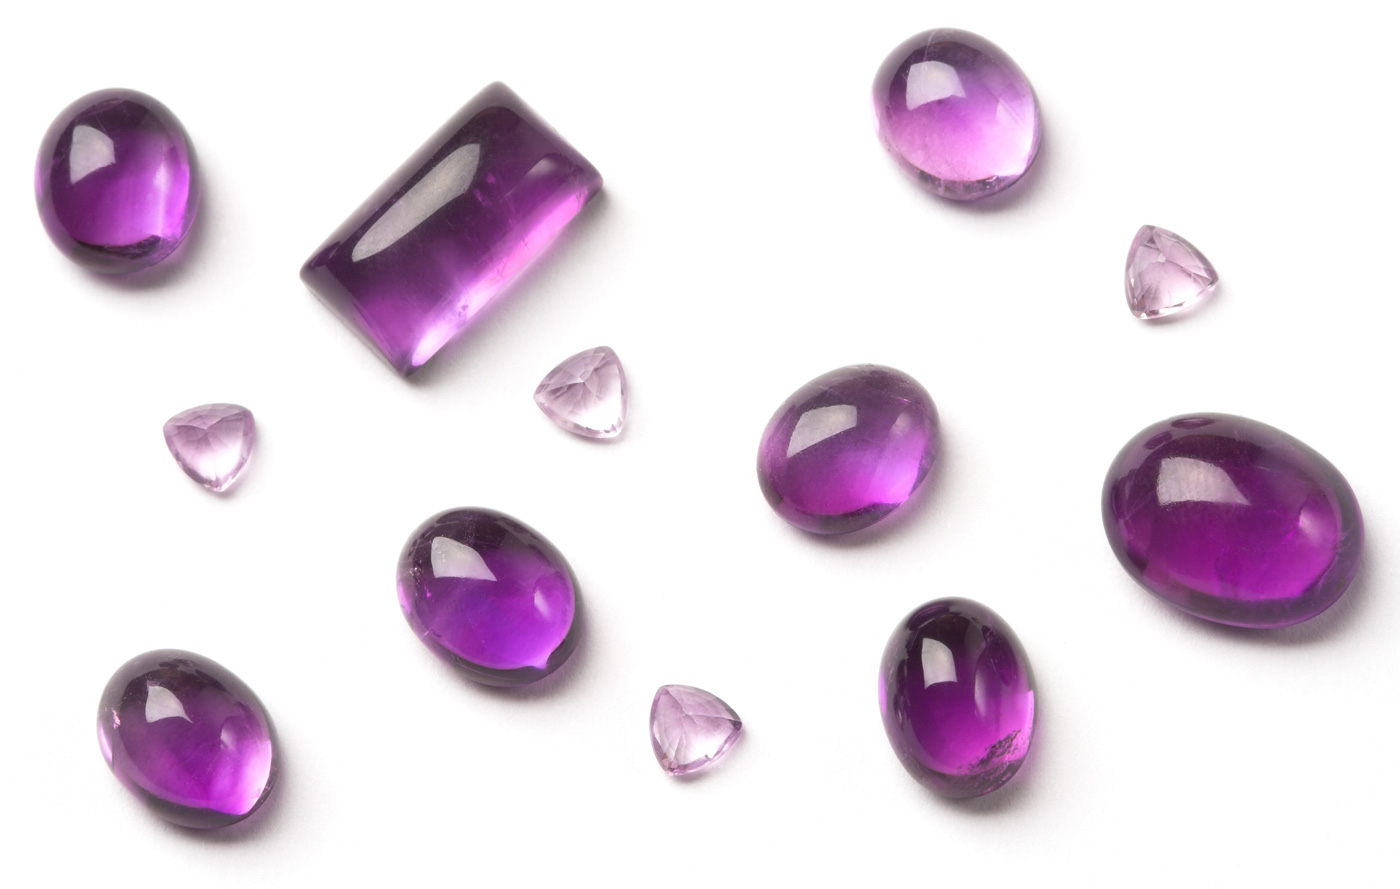 Amethyst in different cuts